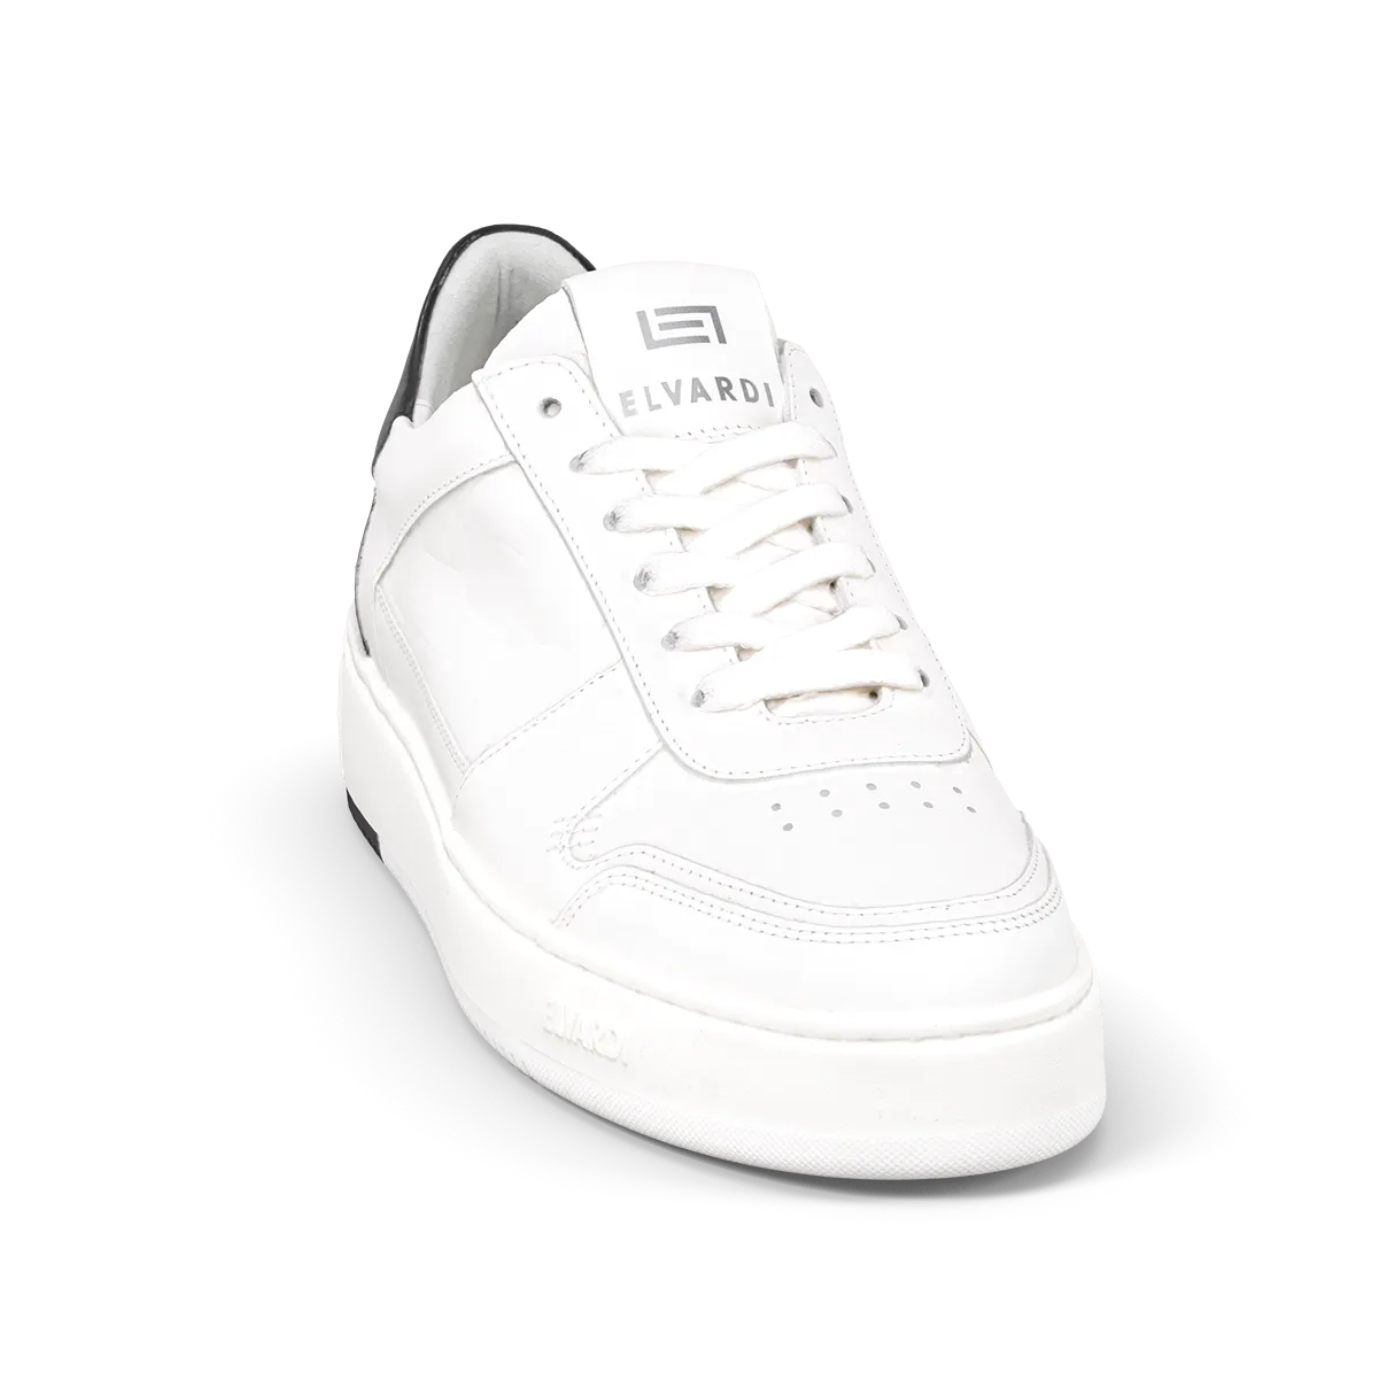 THE BLUEPRINT CLASSIC WHITE CROC PATTERNED